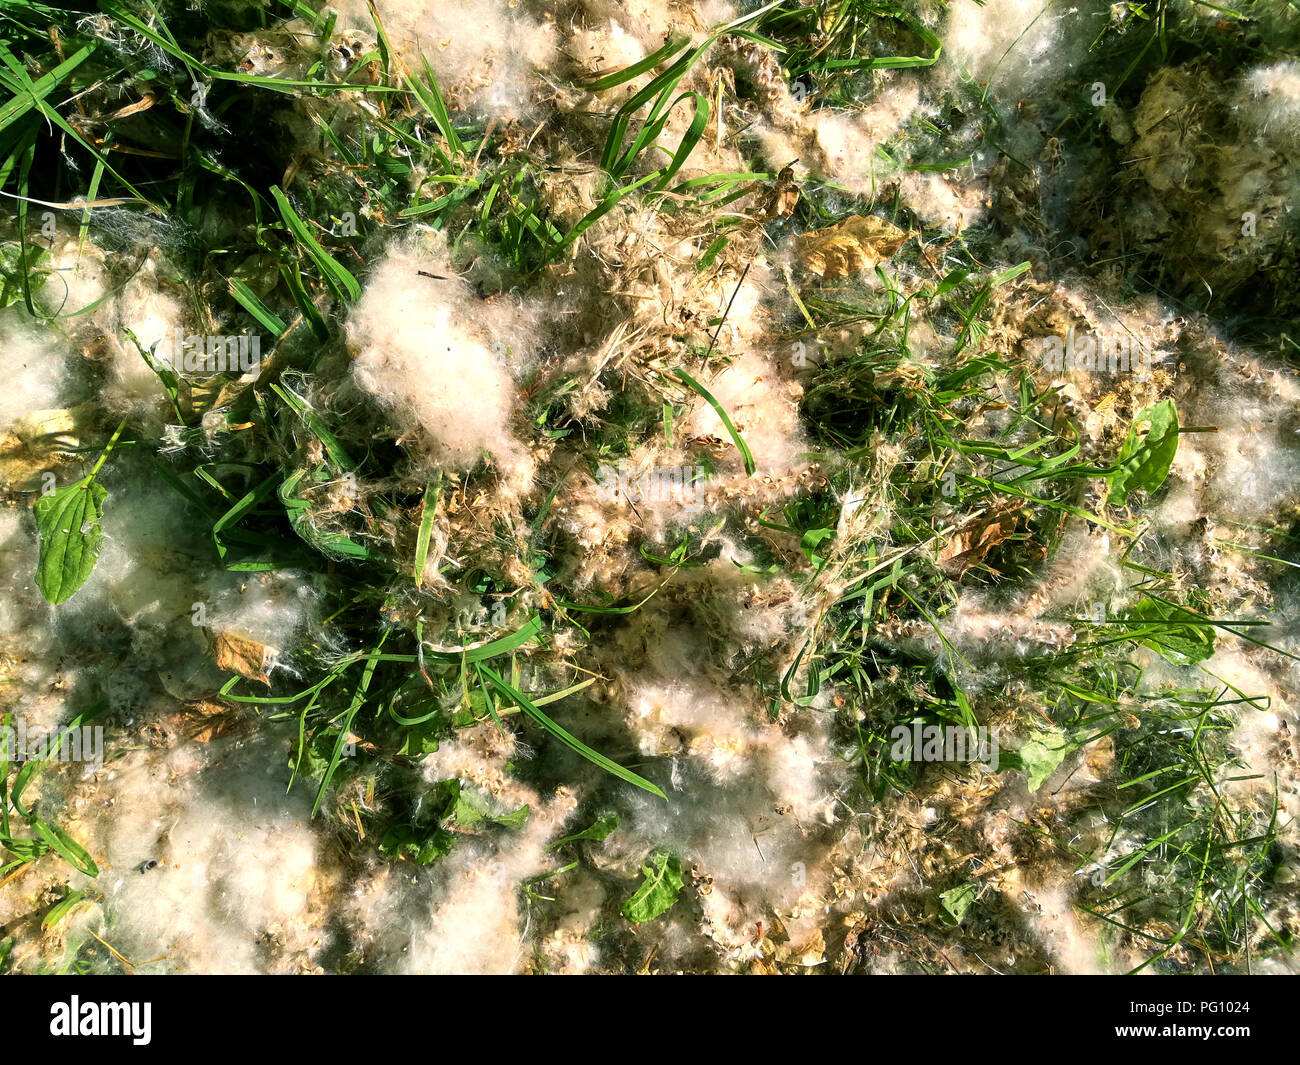 Fluffy allergic white poplar seeds covering the grass in the local park Stock Photo